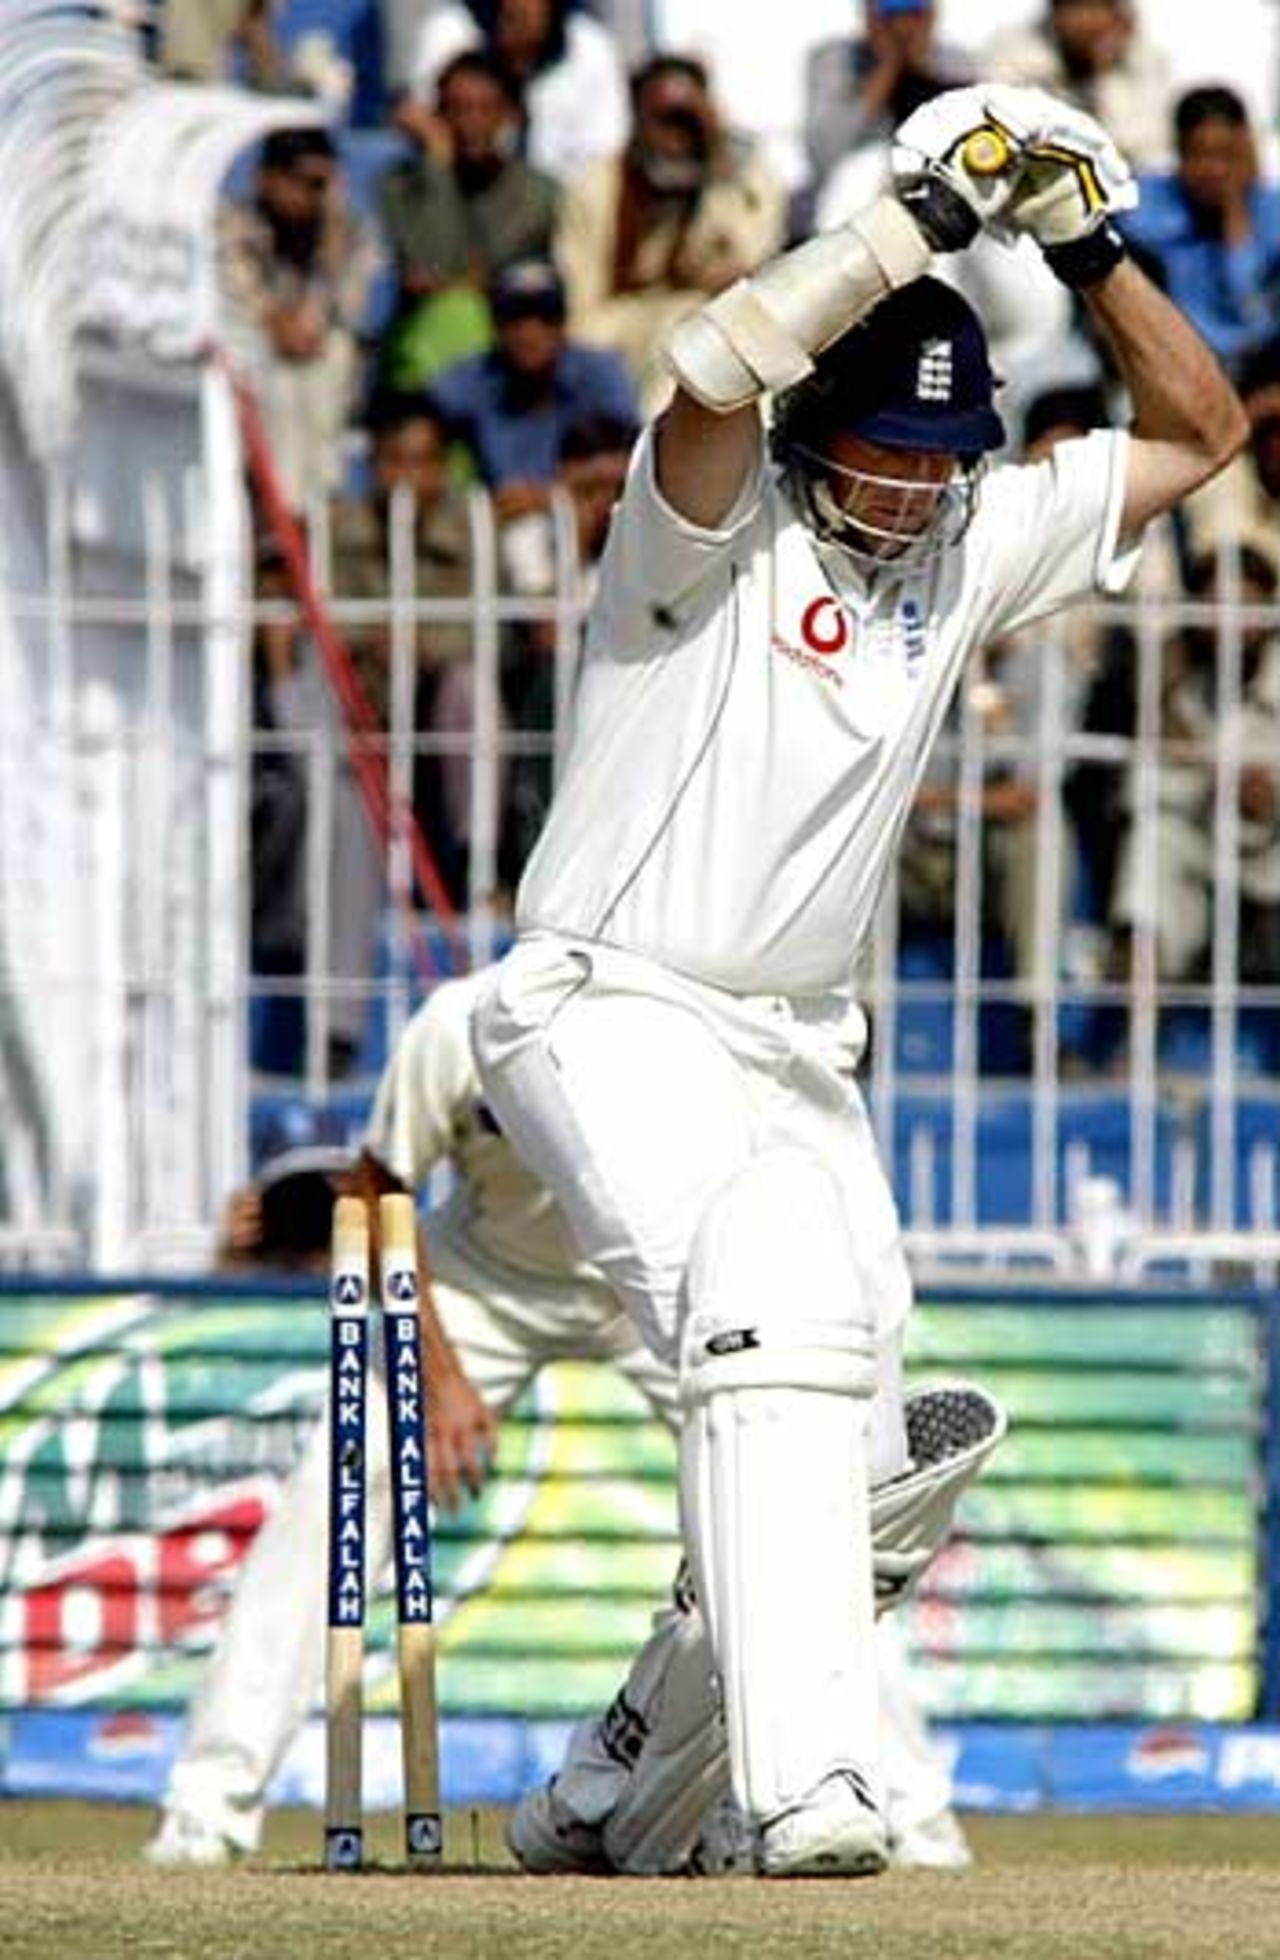 Marcus Trescothick is bowled shouldering arms to Shoaib Akhtar, Pakistan v England, 2nd Test, Faisalabad, November 24, 2005